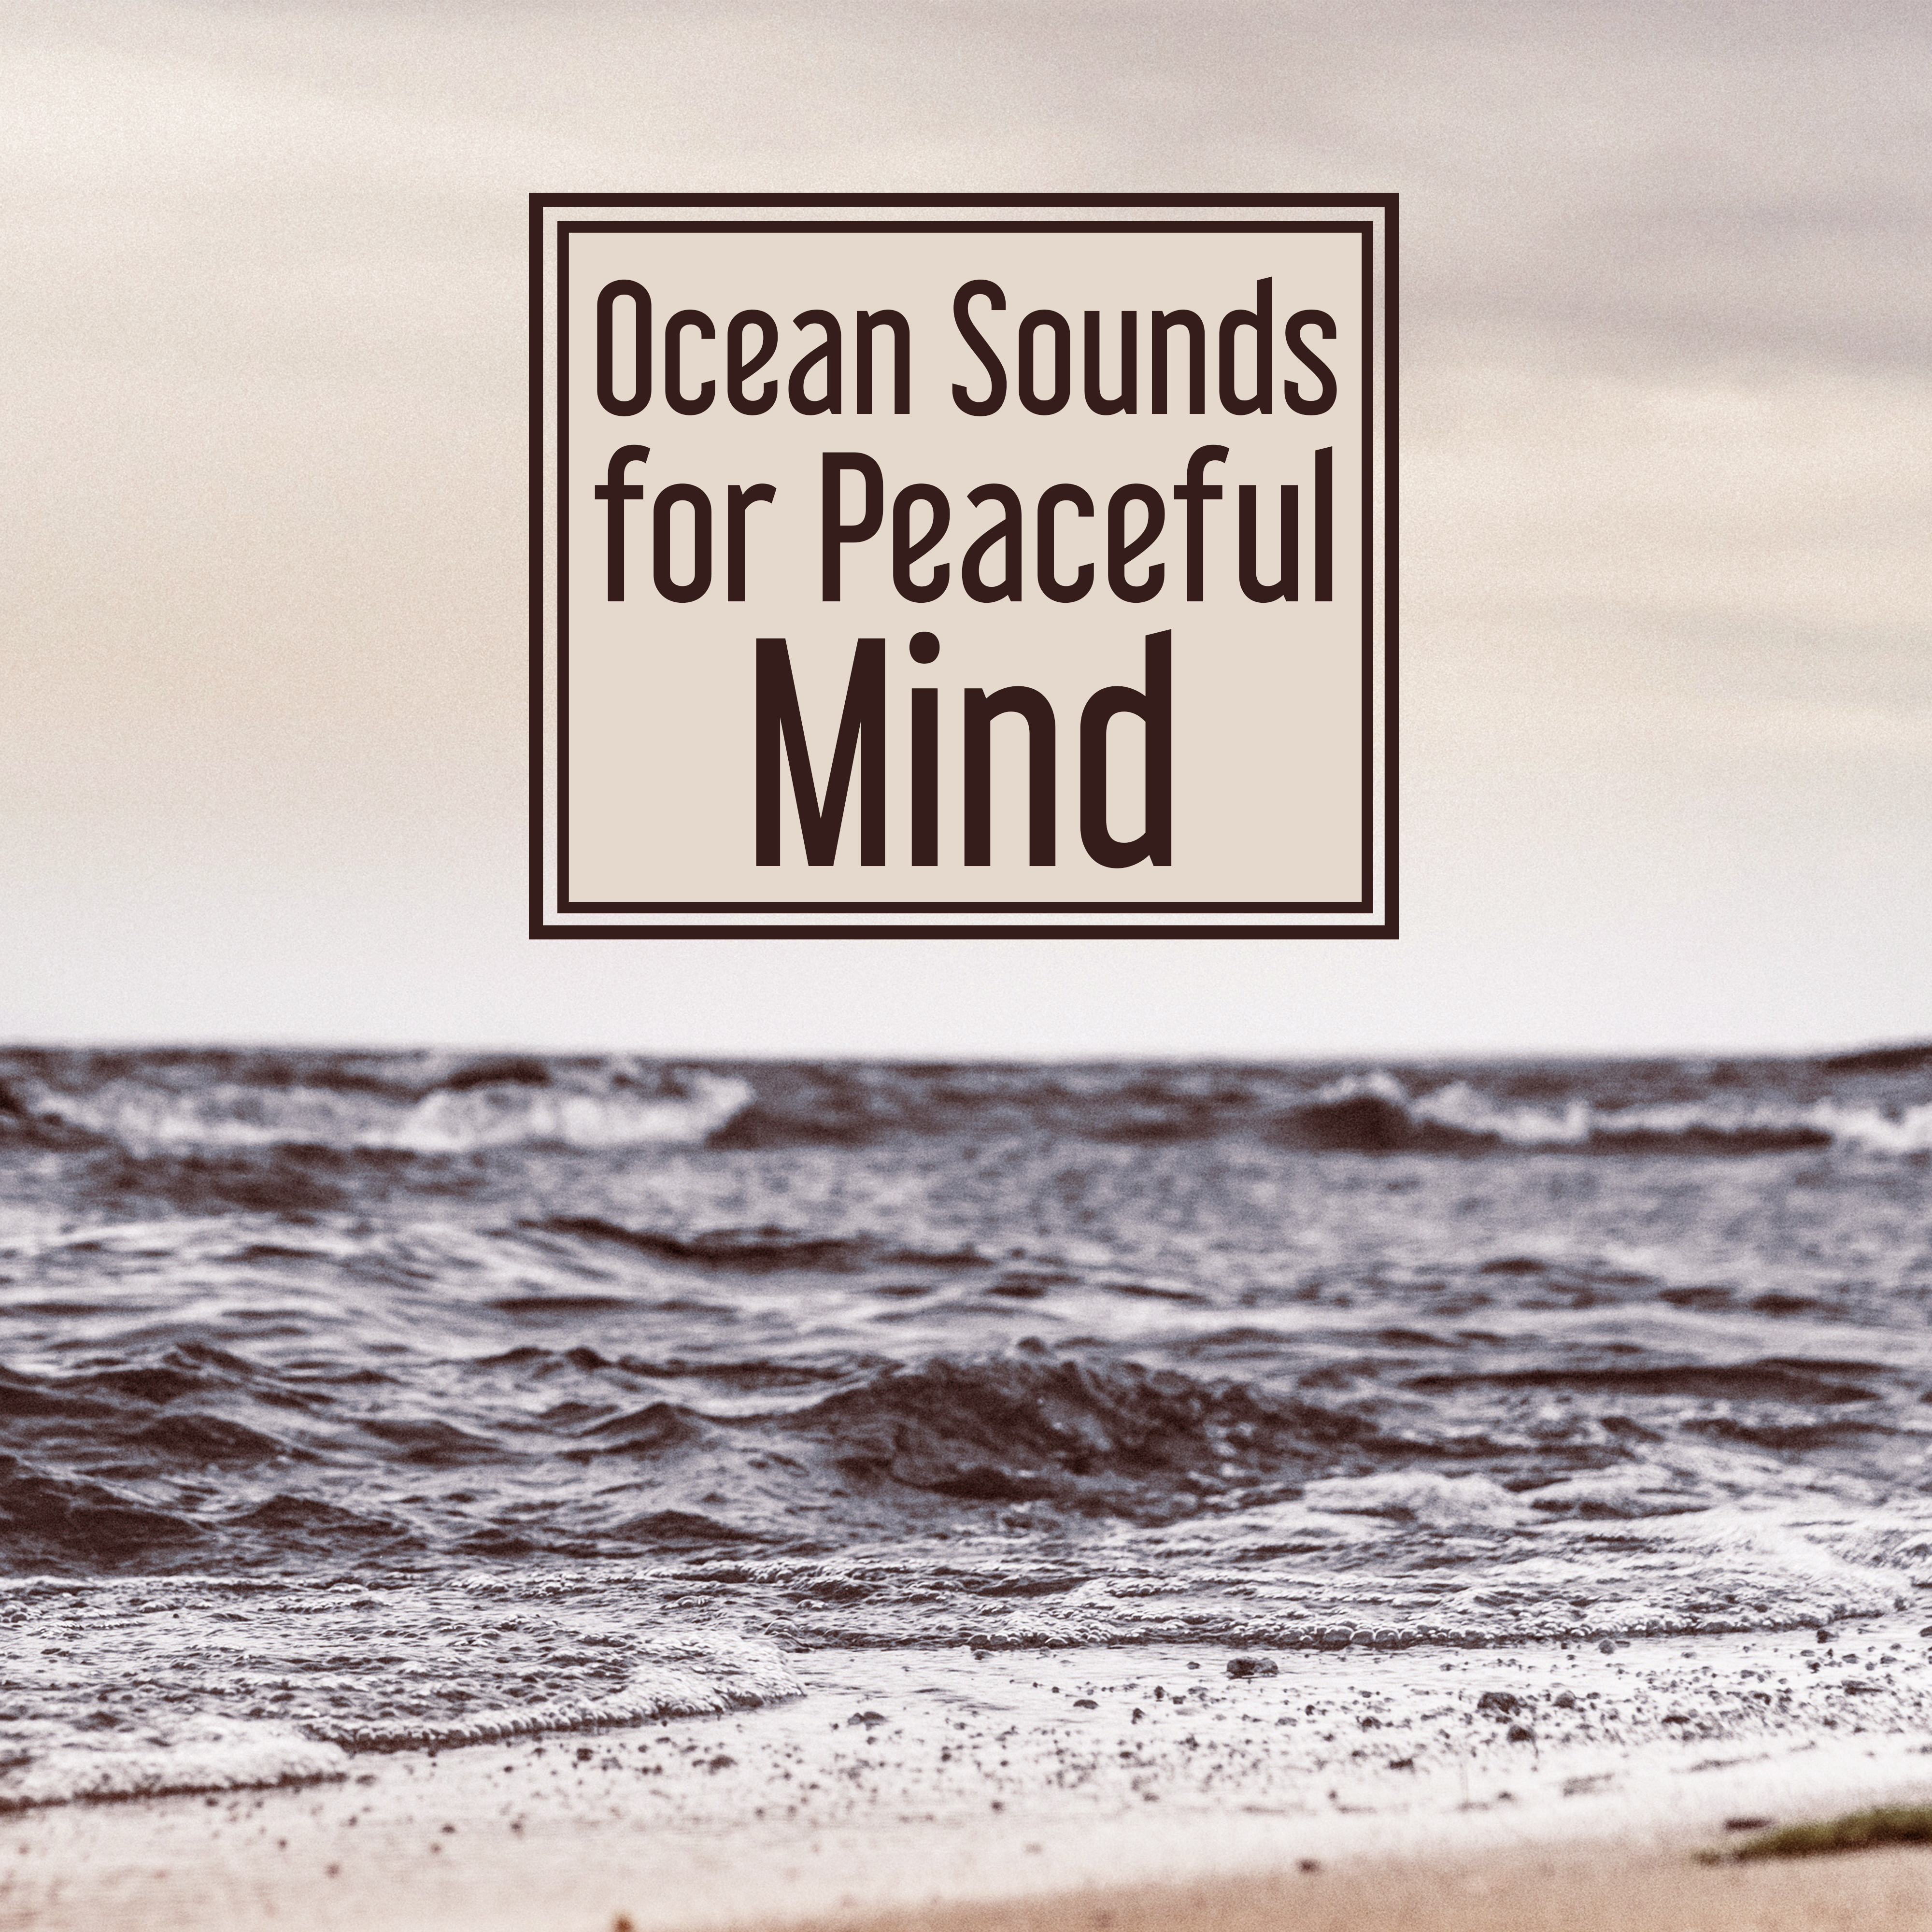 Ocean Sounds for Peaceful Mind – Stress Relief, Spirit Harmony, Beautiful Music, New Age Relaxation